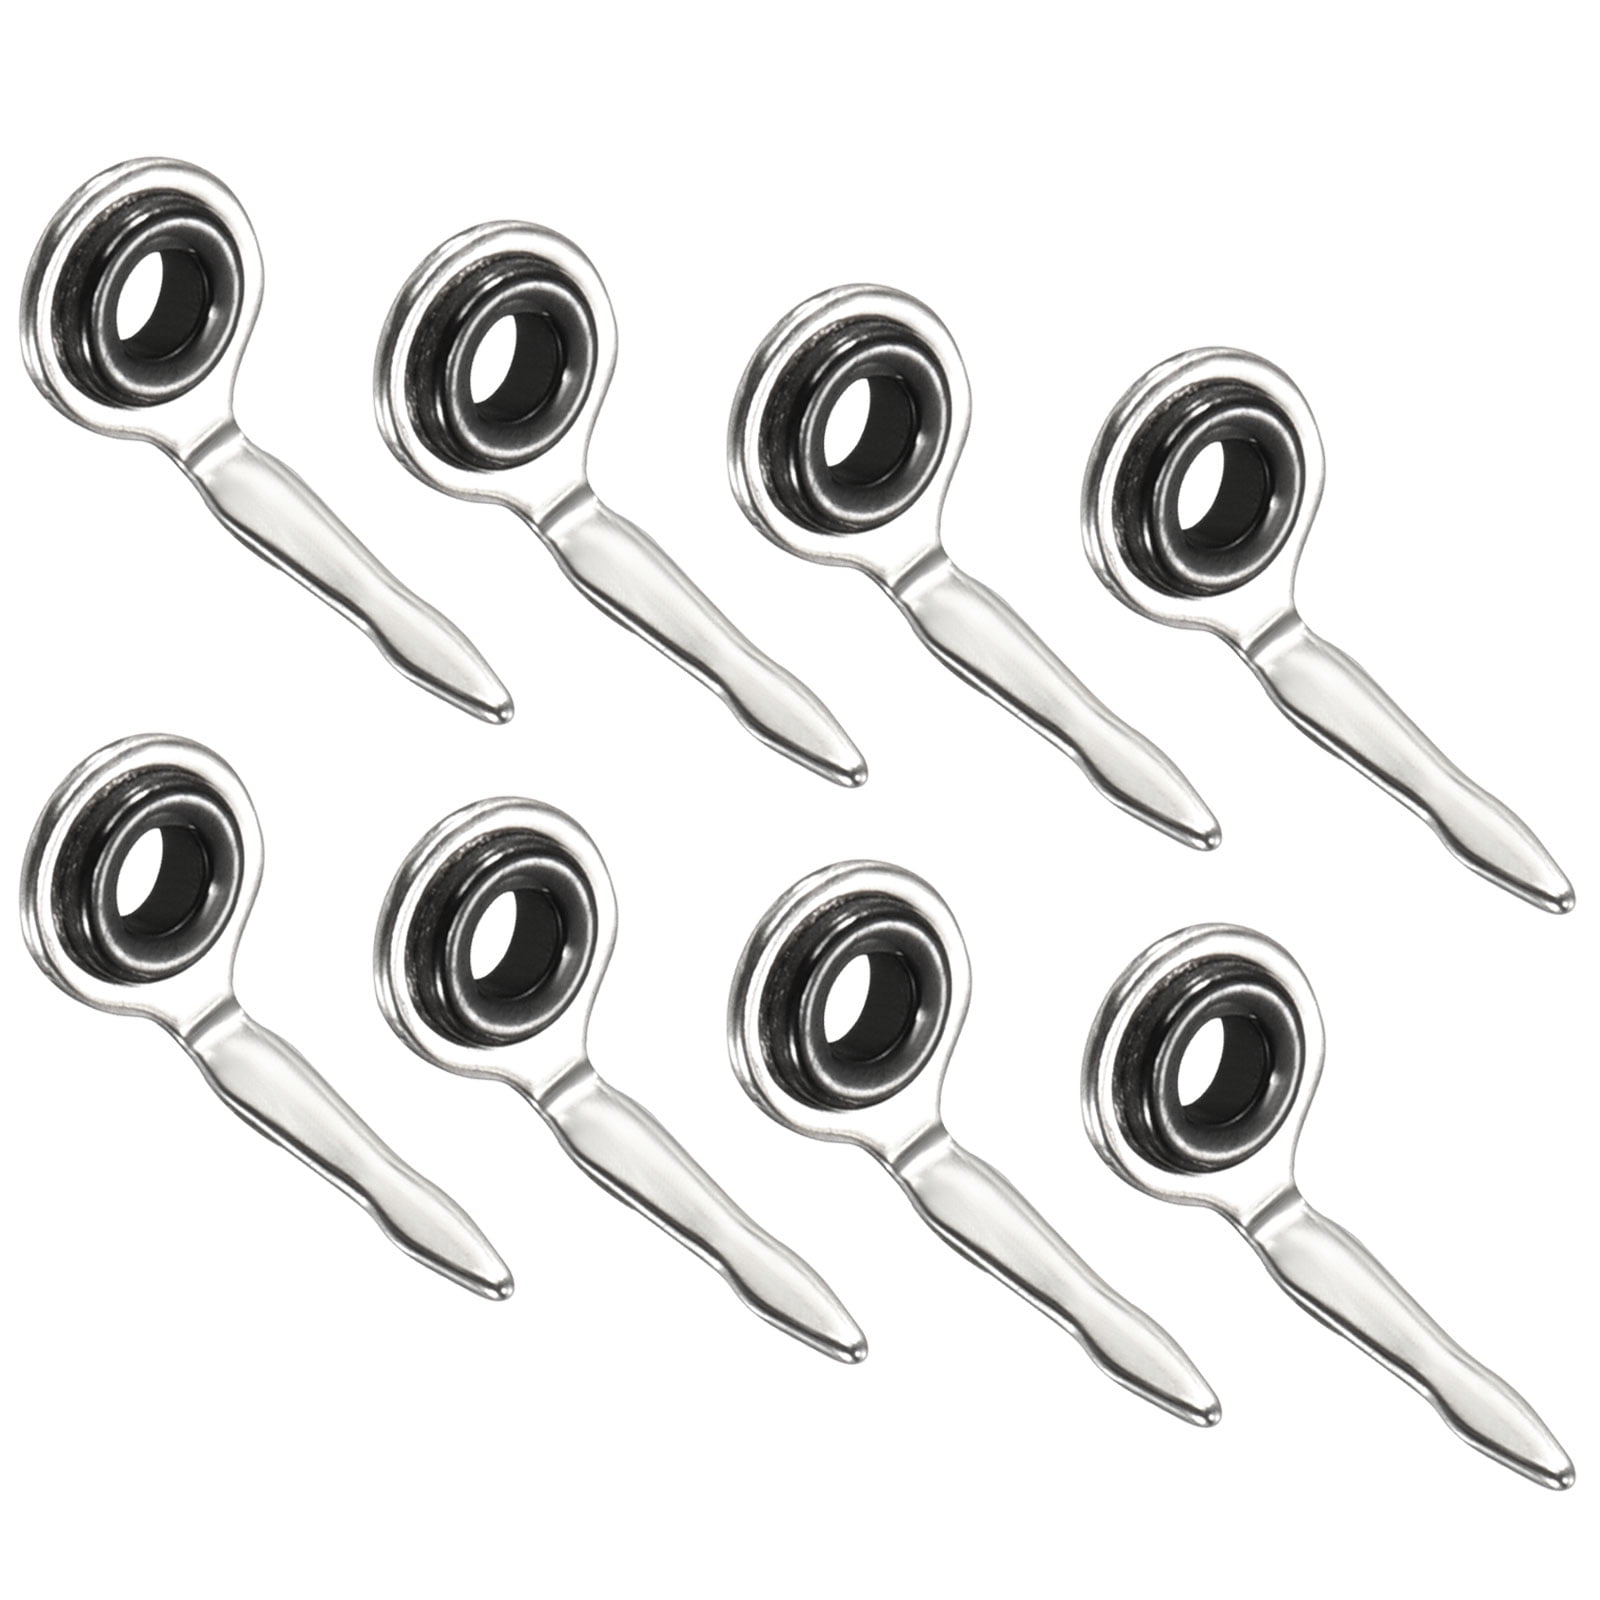 1.5mm Iron Fishing Rod Guide Repair Kit Eyelet Replacement, Silver 8 Pack 